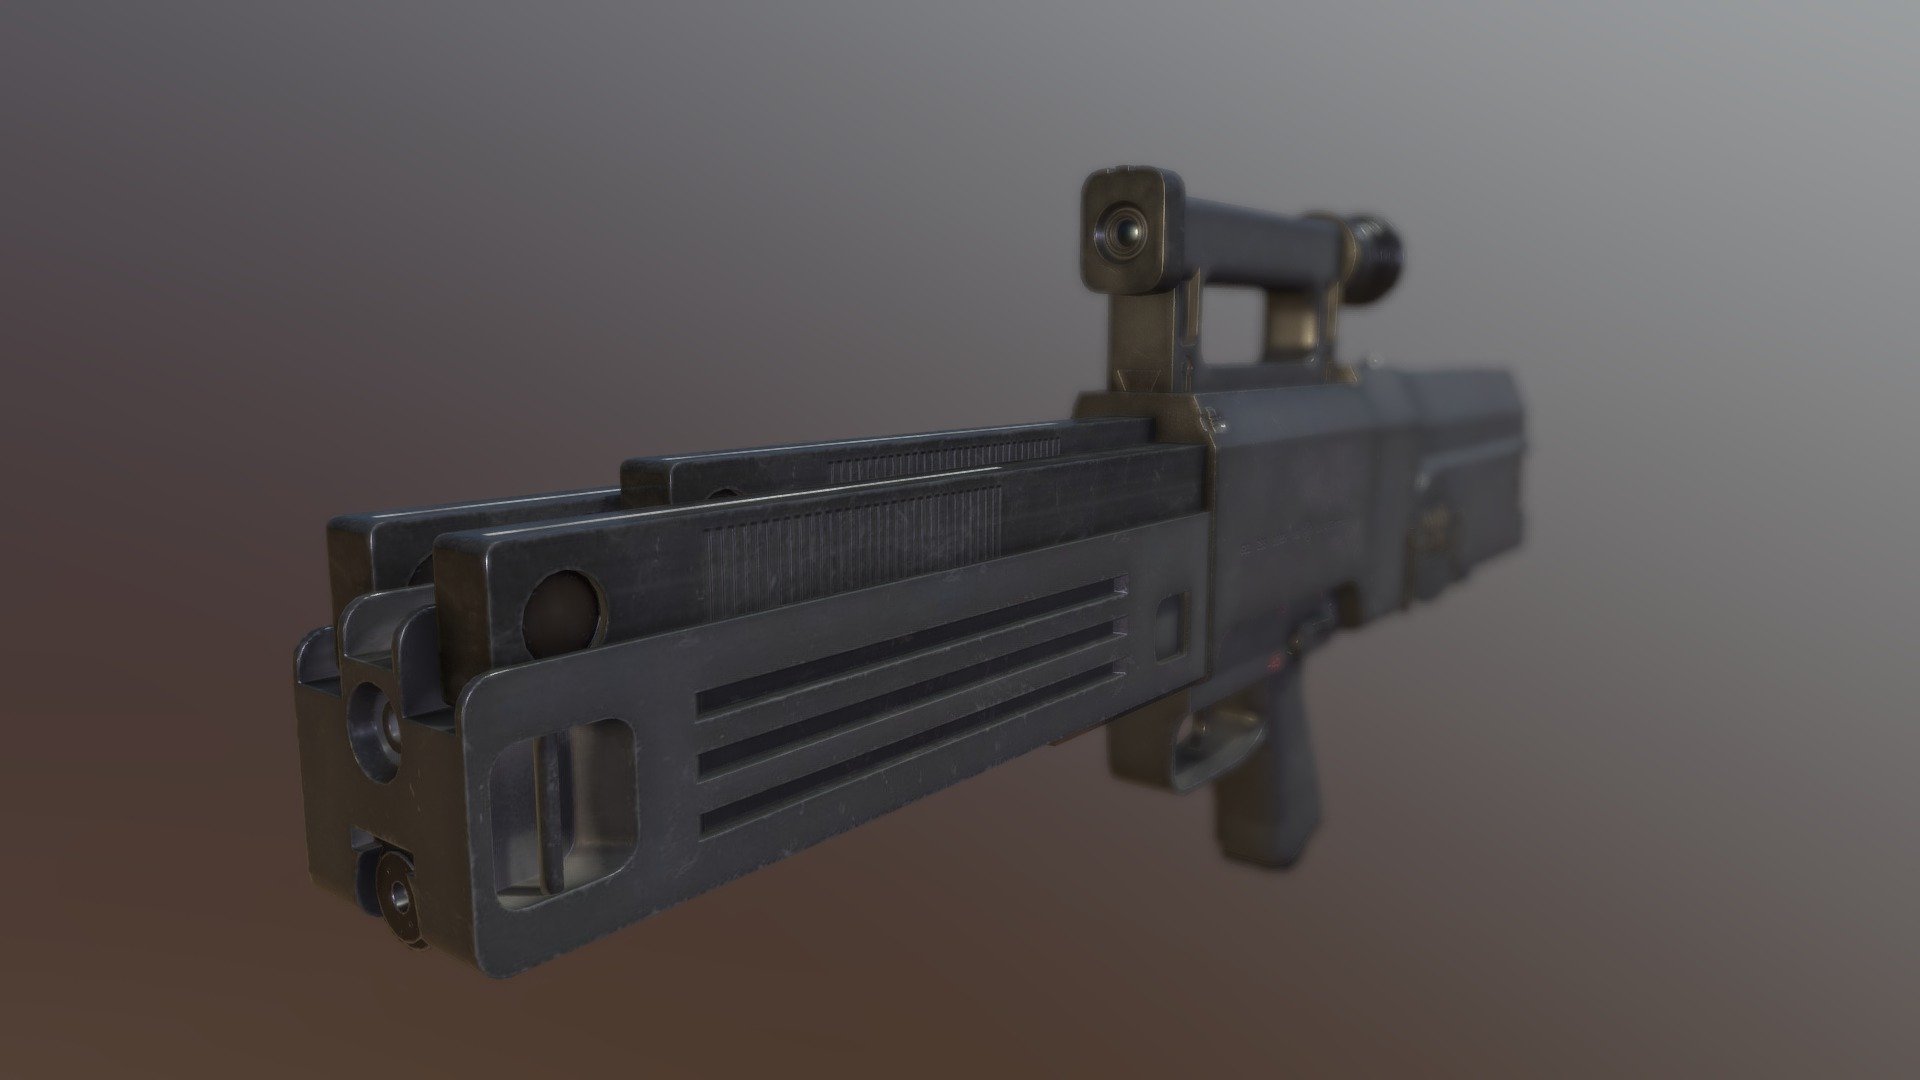 Based from HK G11 manufactured by Heckler and Koch.

Baked textures on 2048 x 2048 resolution 3d model